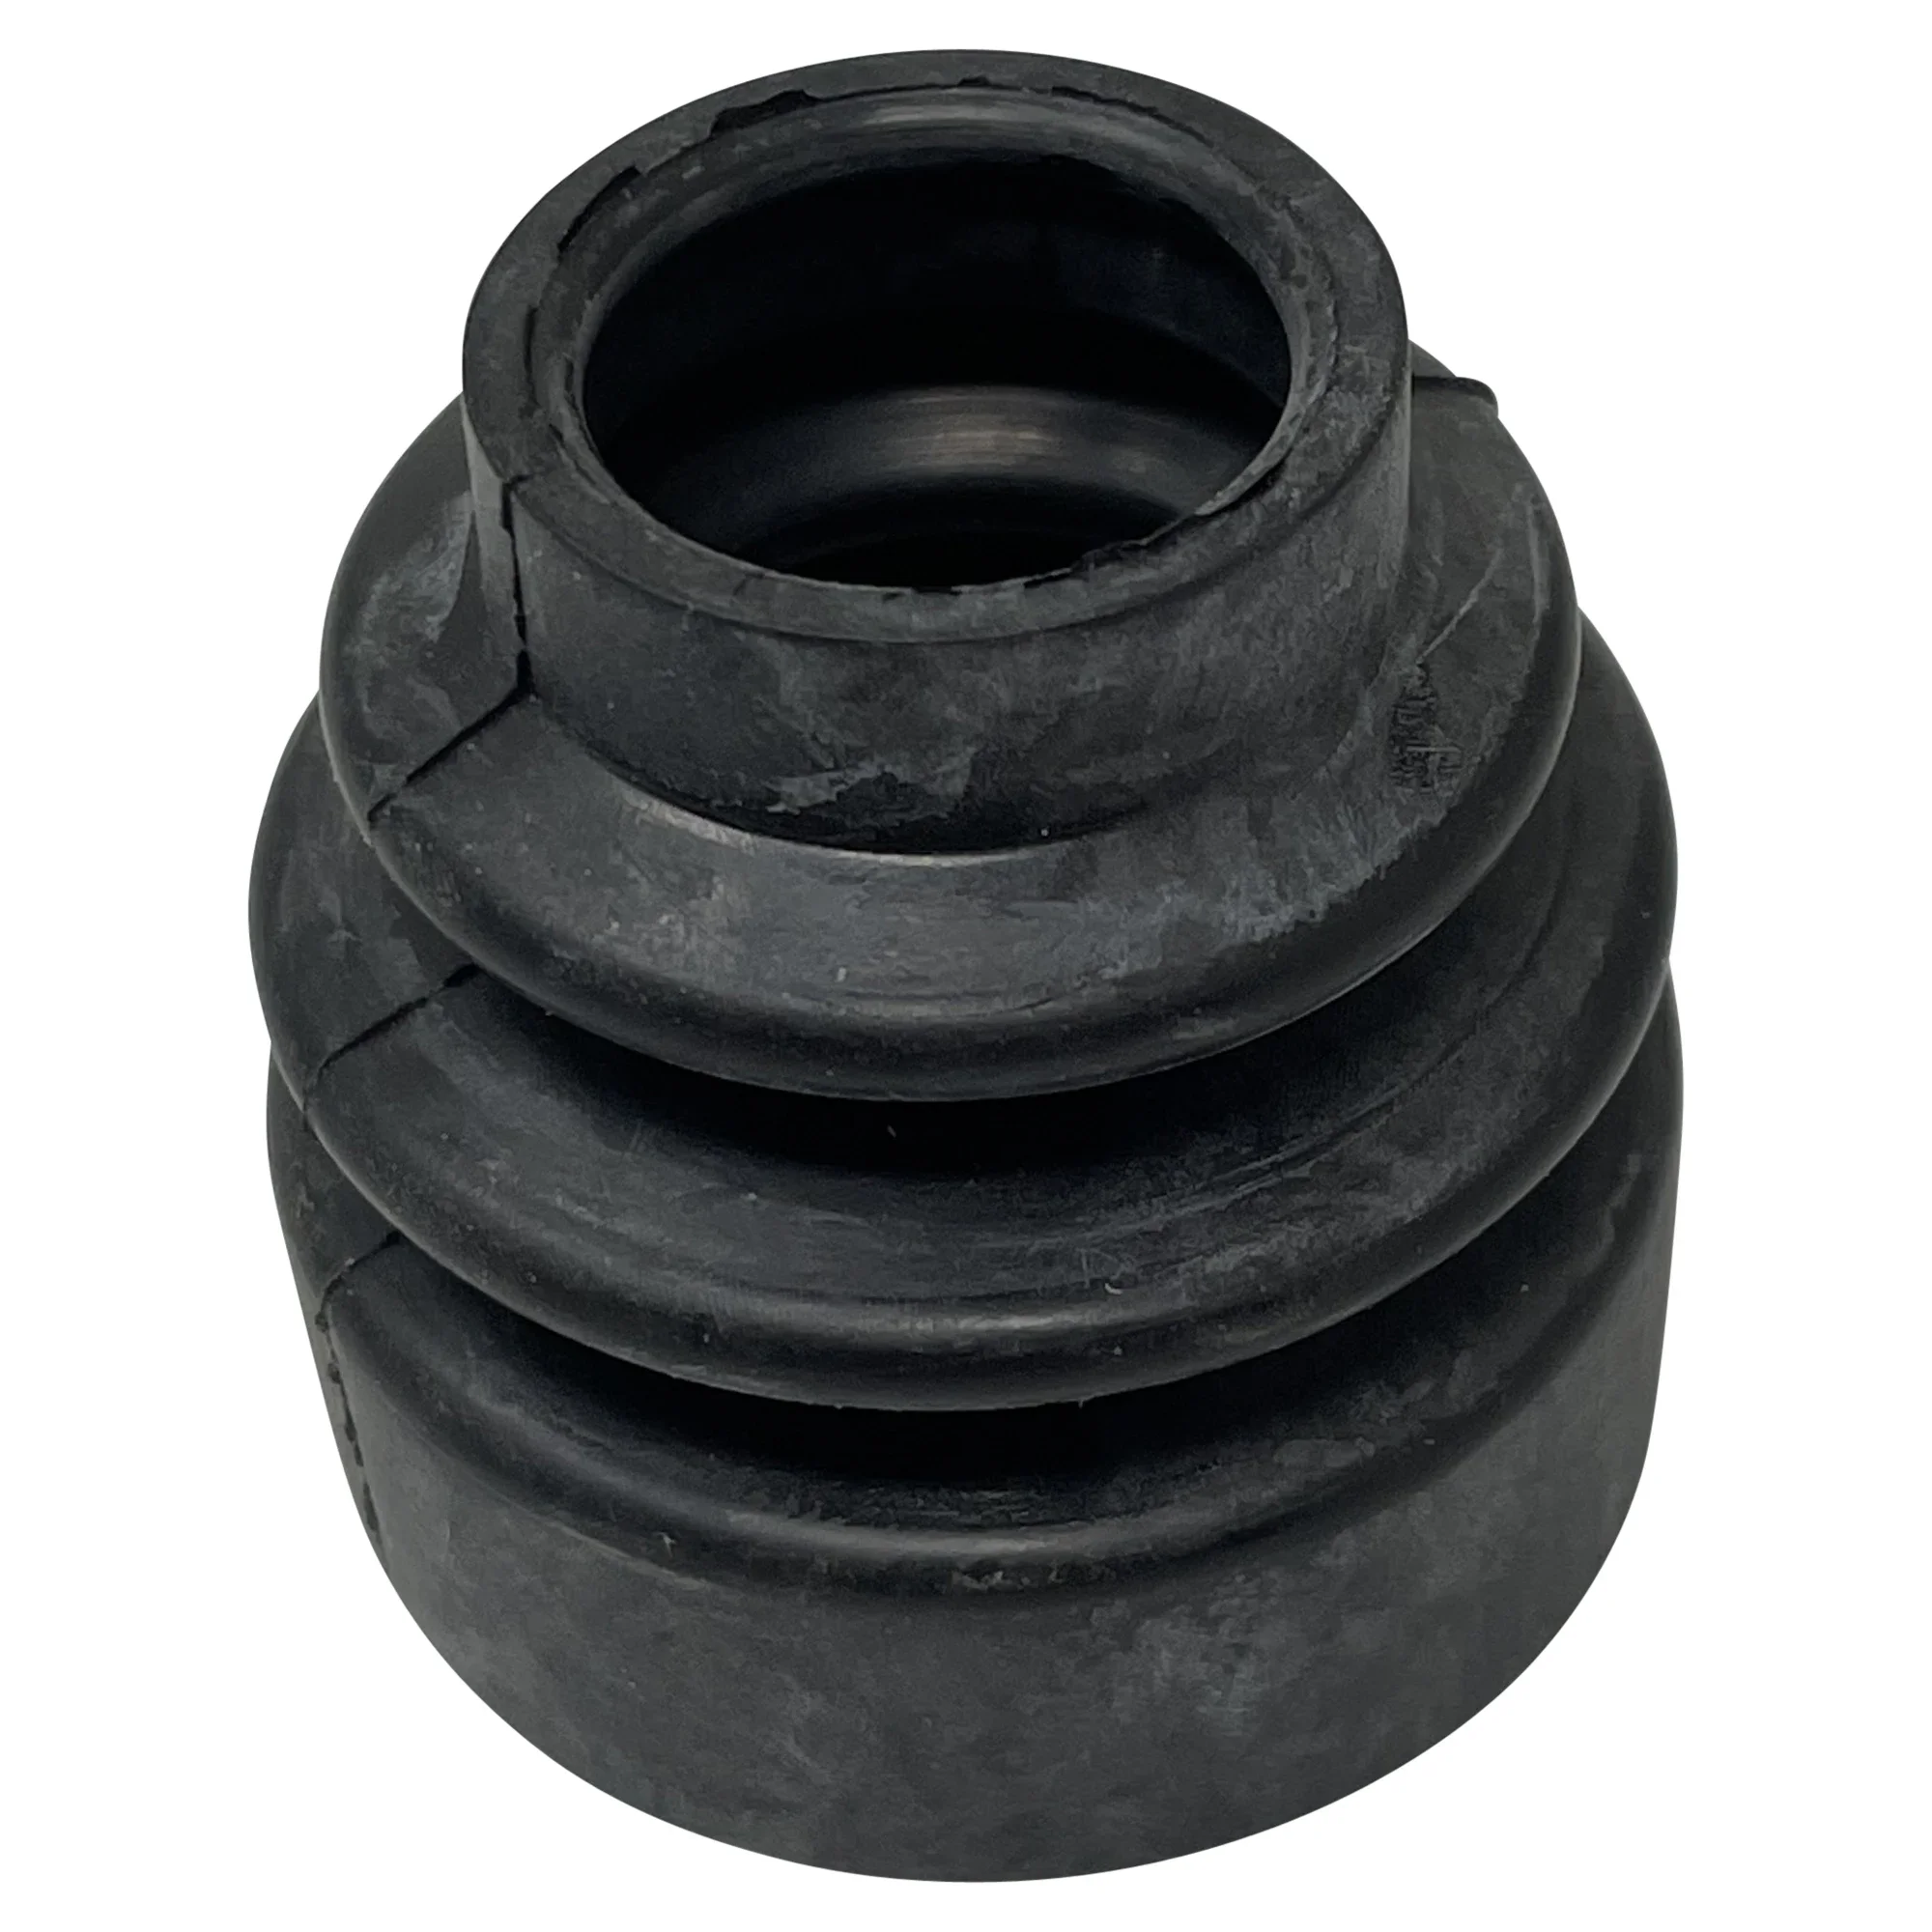 Galbreath™ Rubber Boot For Valve Handle